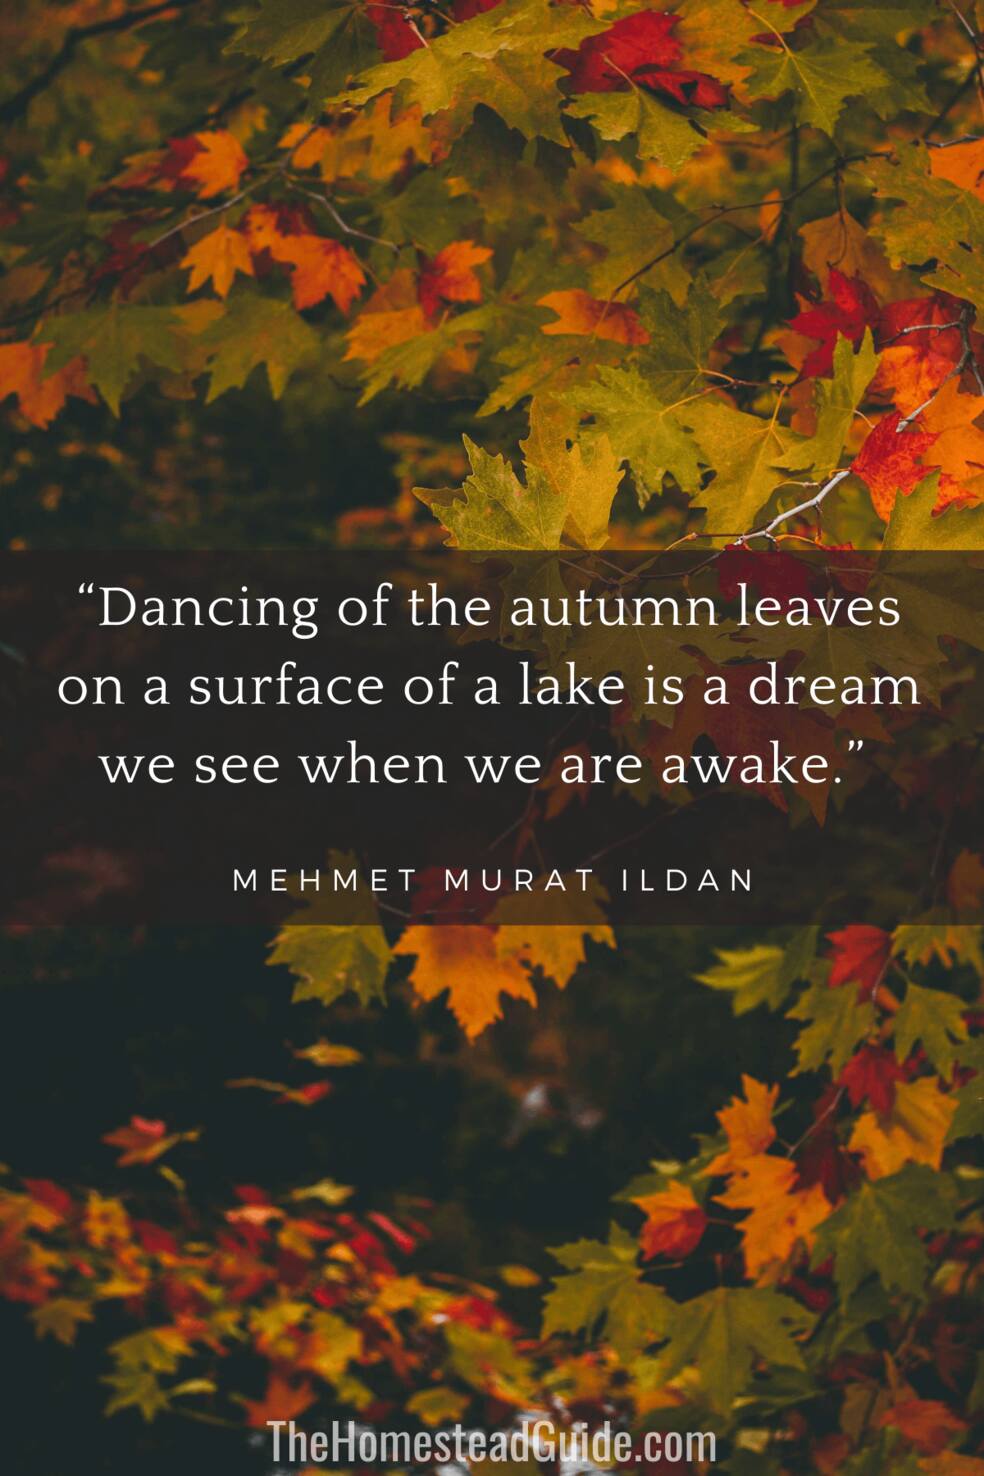 Dancing of the autumn leaves on a surface of a lake is a dream we see when we are awake.